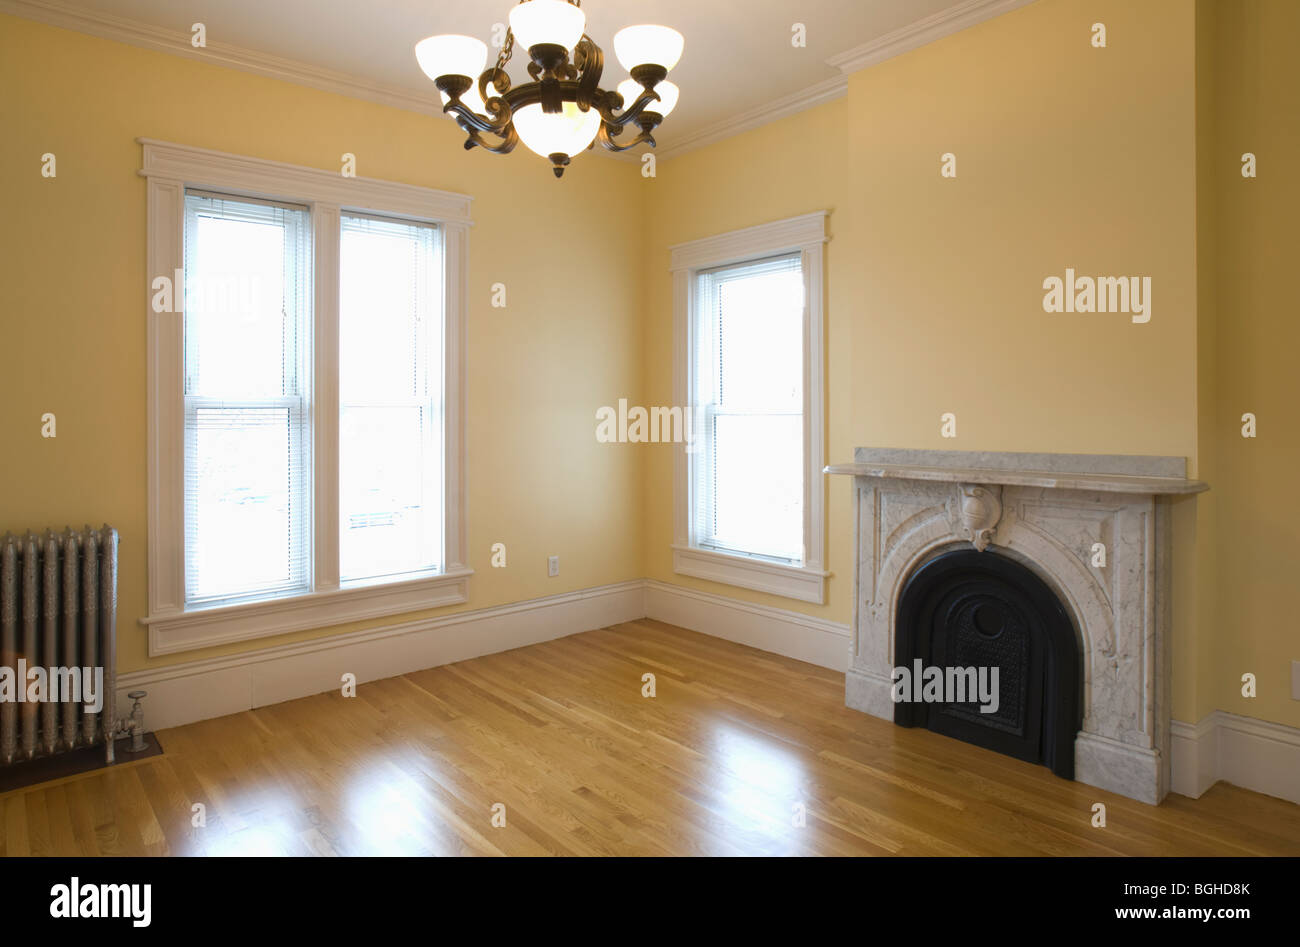 Empty room in apartment with hardwood floor and heater Stock Photo